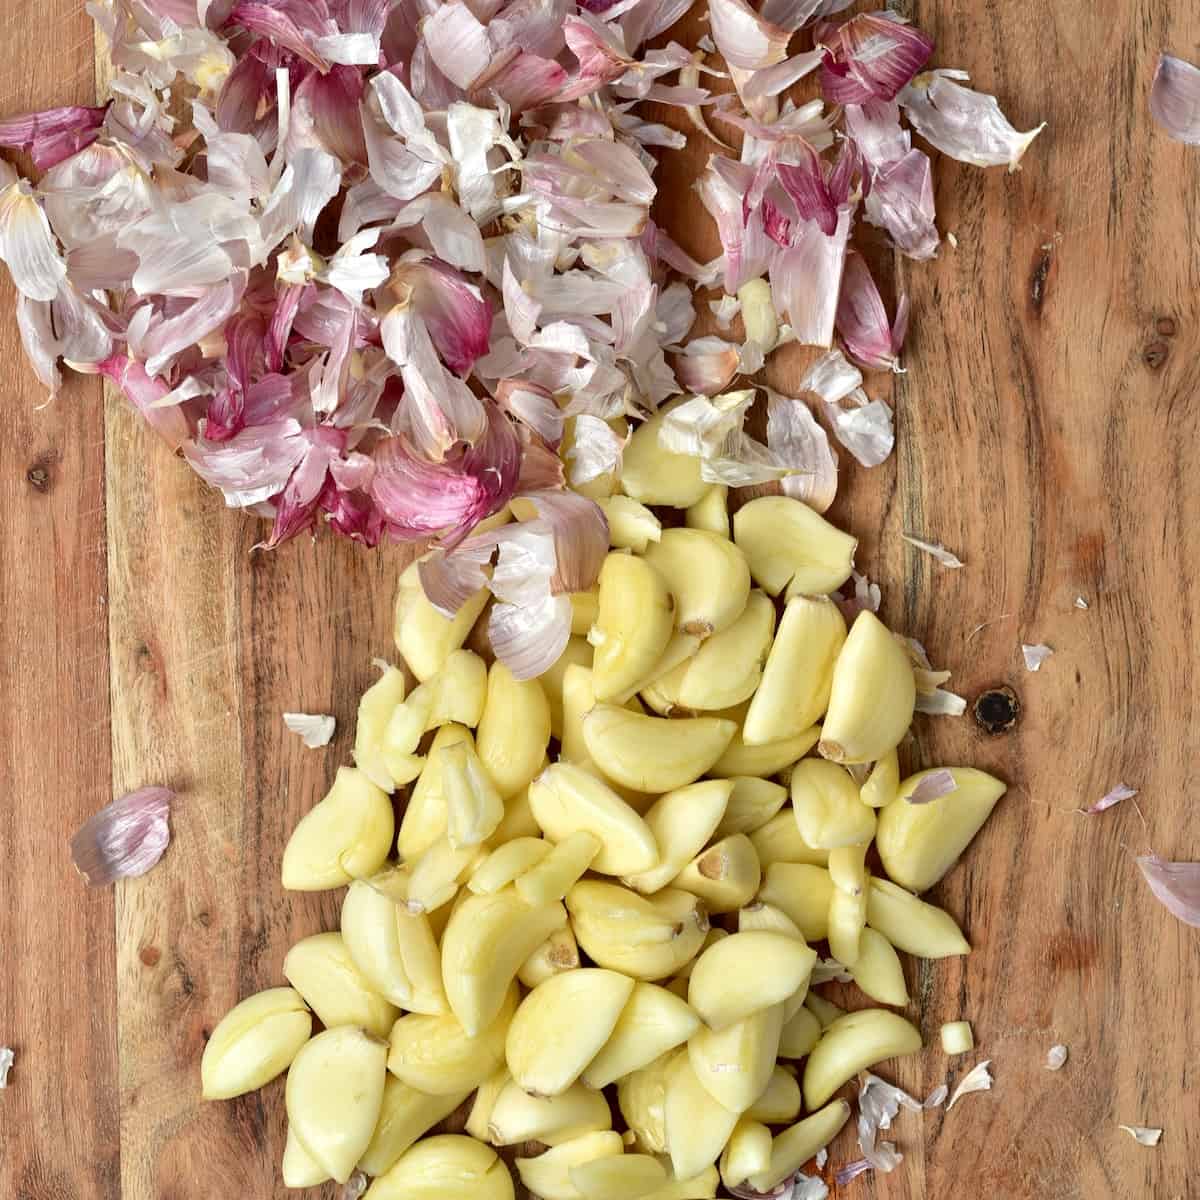 https://www.alphafoodie.com/wp-content/uploads/2021/02/How-to-easily-peel-Garlic-1-of-1.jpeg